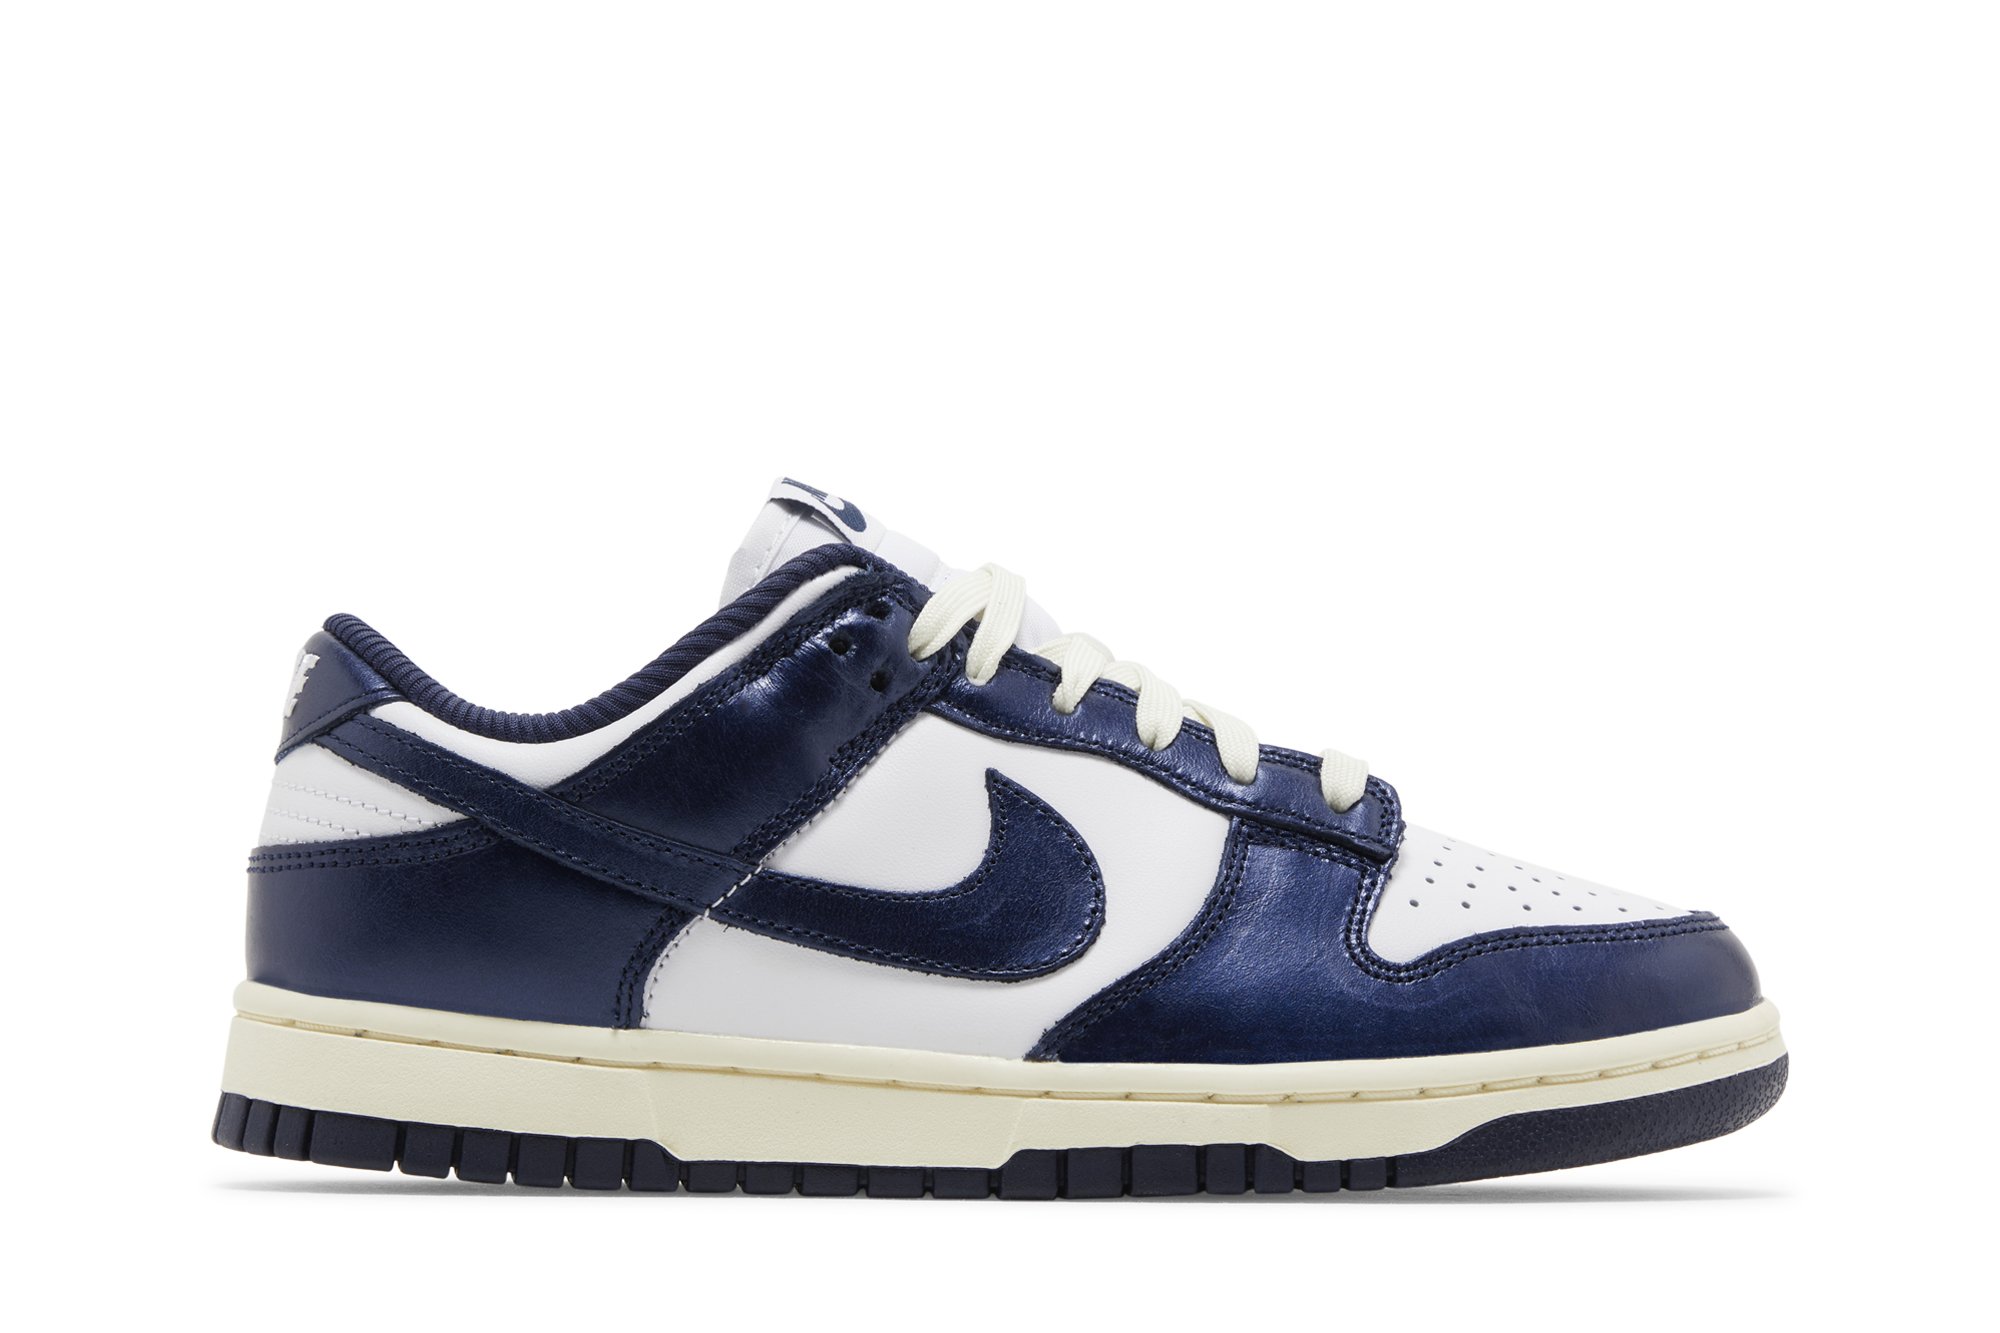 Nike WMNS Dunk Low "Vintage Navy